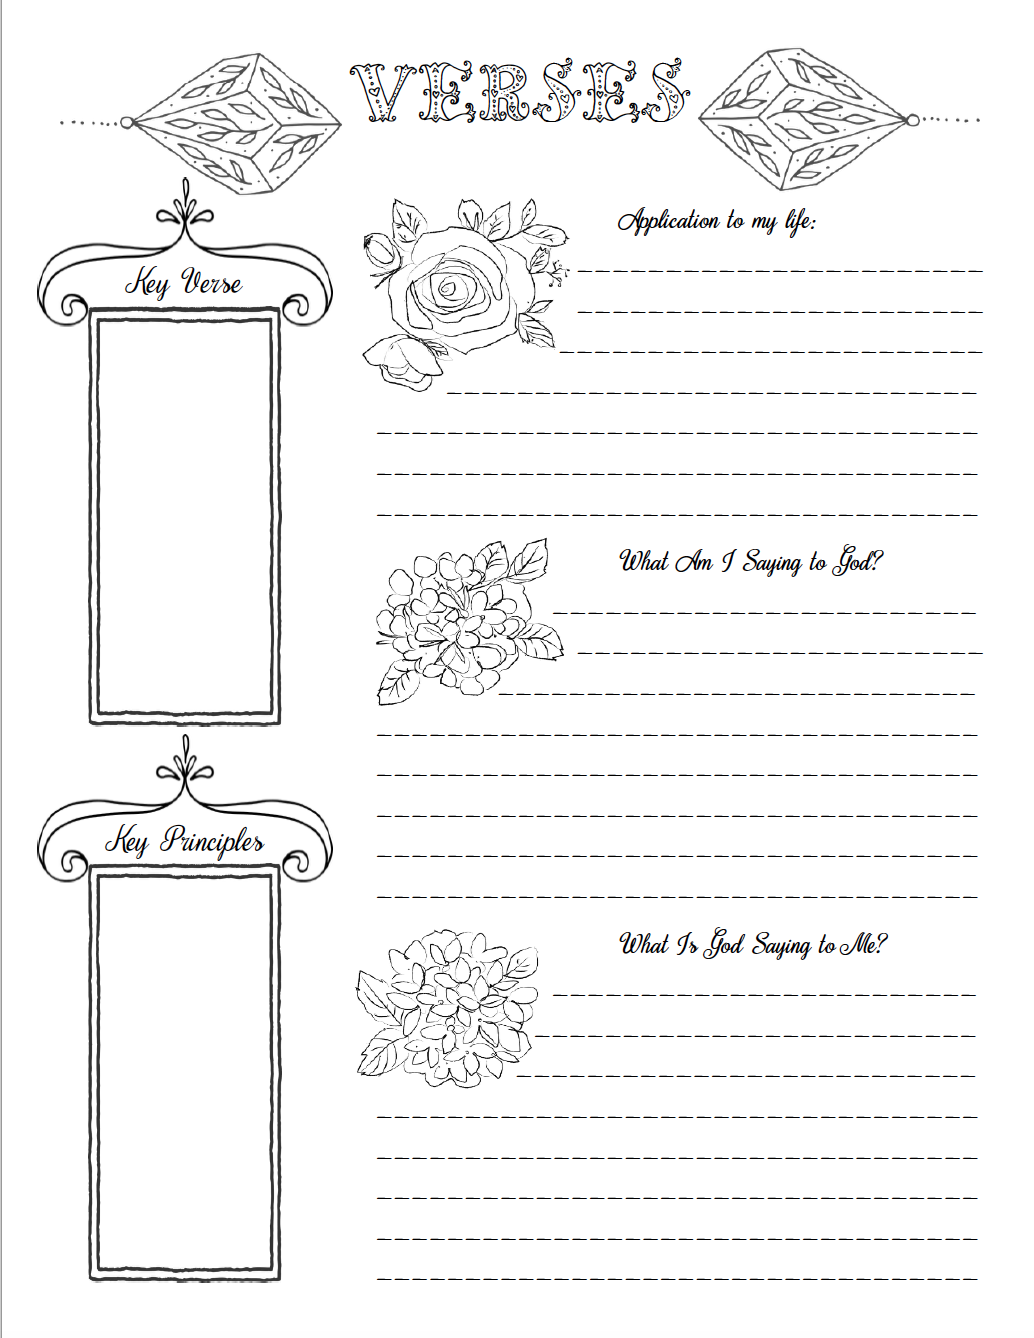 Free Bible Journaling Printables (Including One You Can